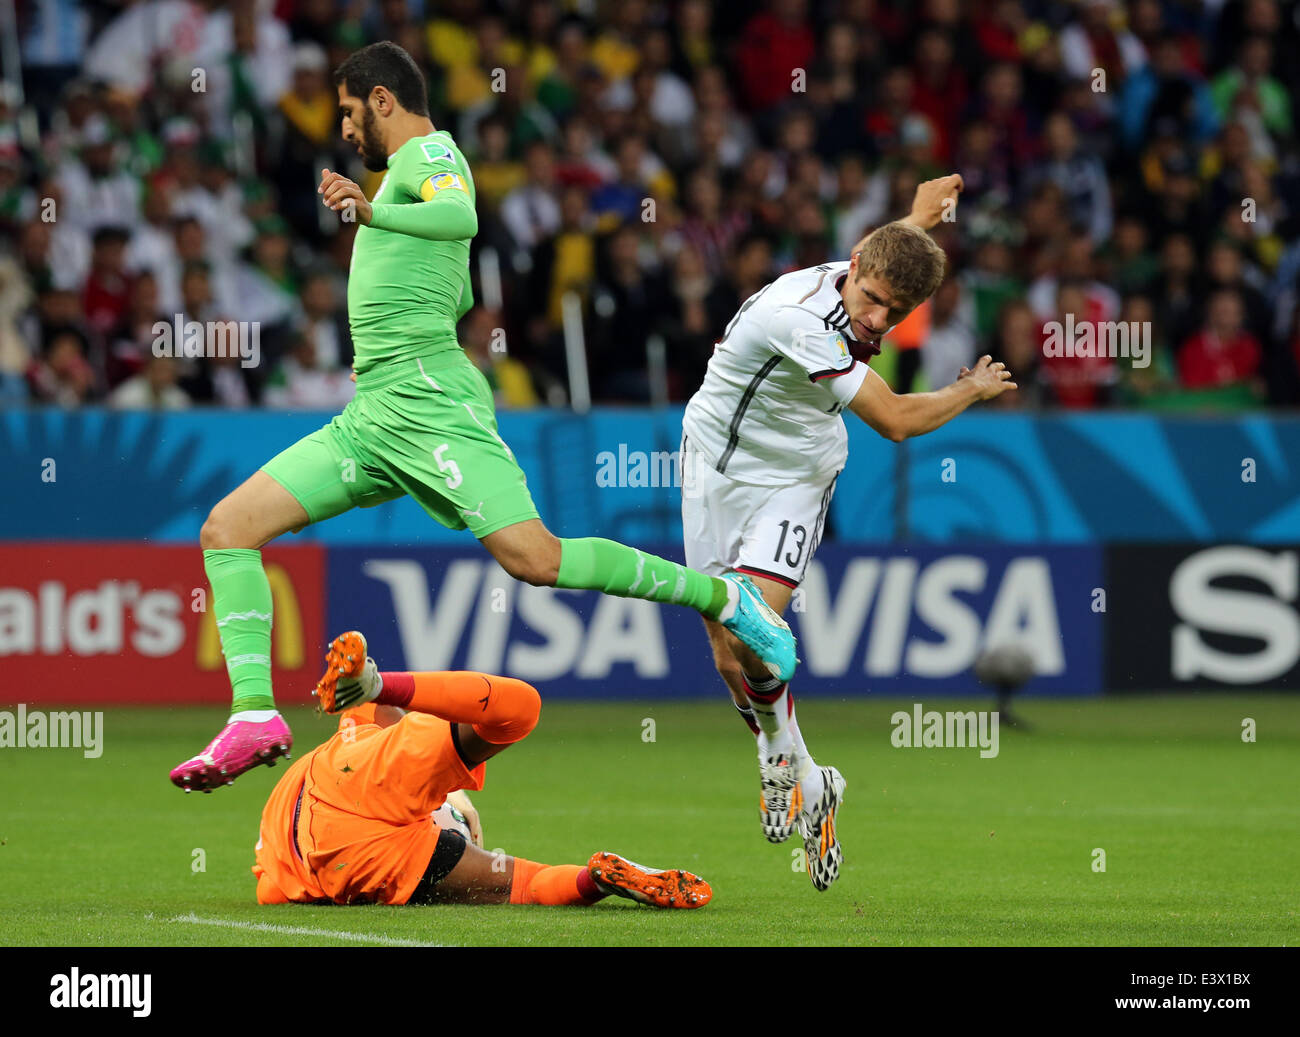 Porto Alegre, Brazil. 30th June, 2014. World Cup 2nd Round. Germany versus Algeria. Goalkeeper Mbohli saves the shot from Mueller watched by teammate Halliche Credit:  Action Plus Sports/Alamy Live News Stock Photo